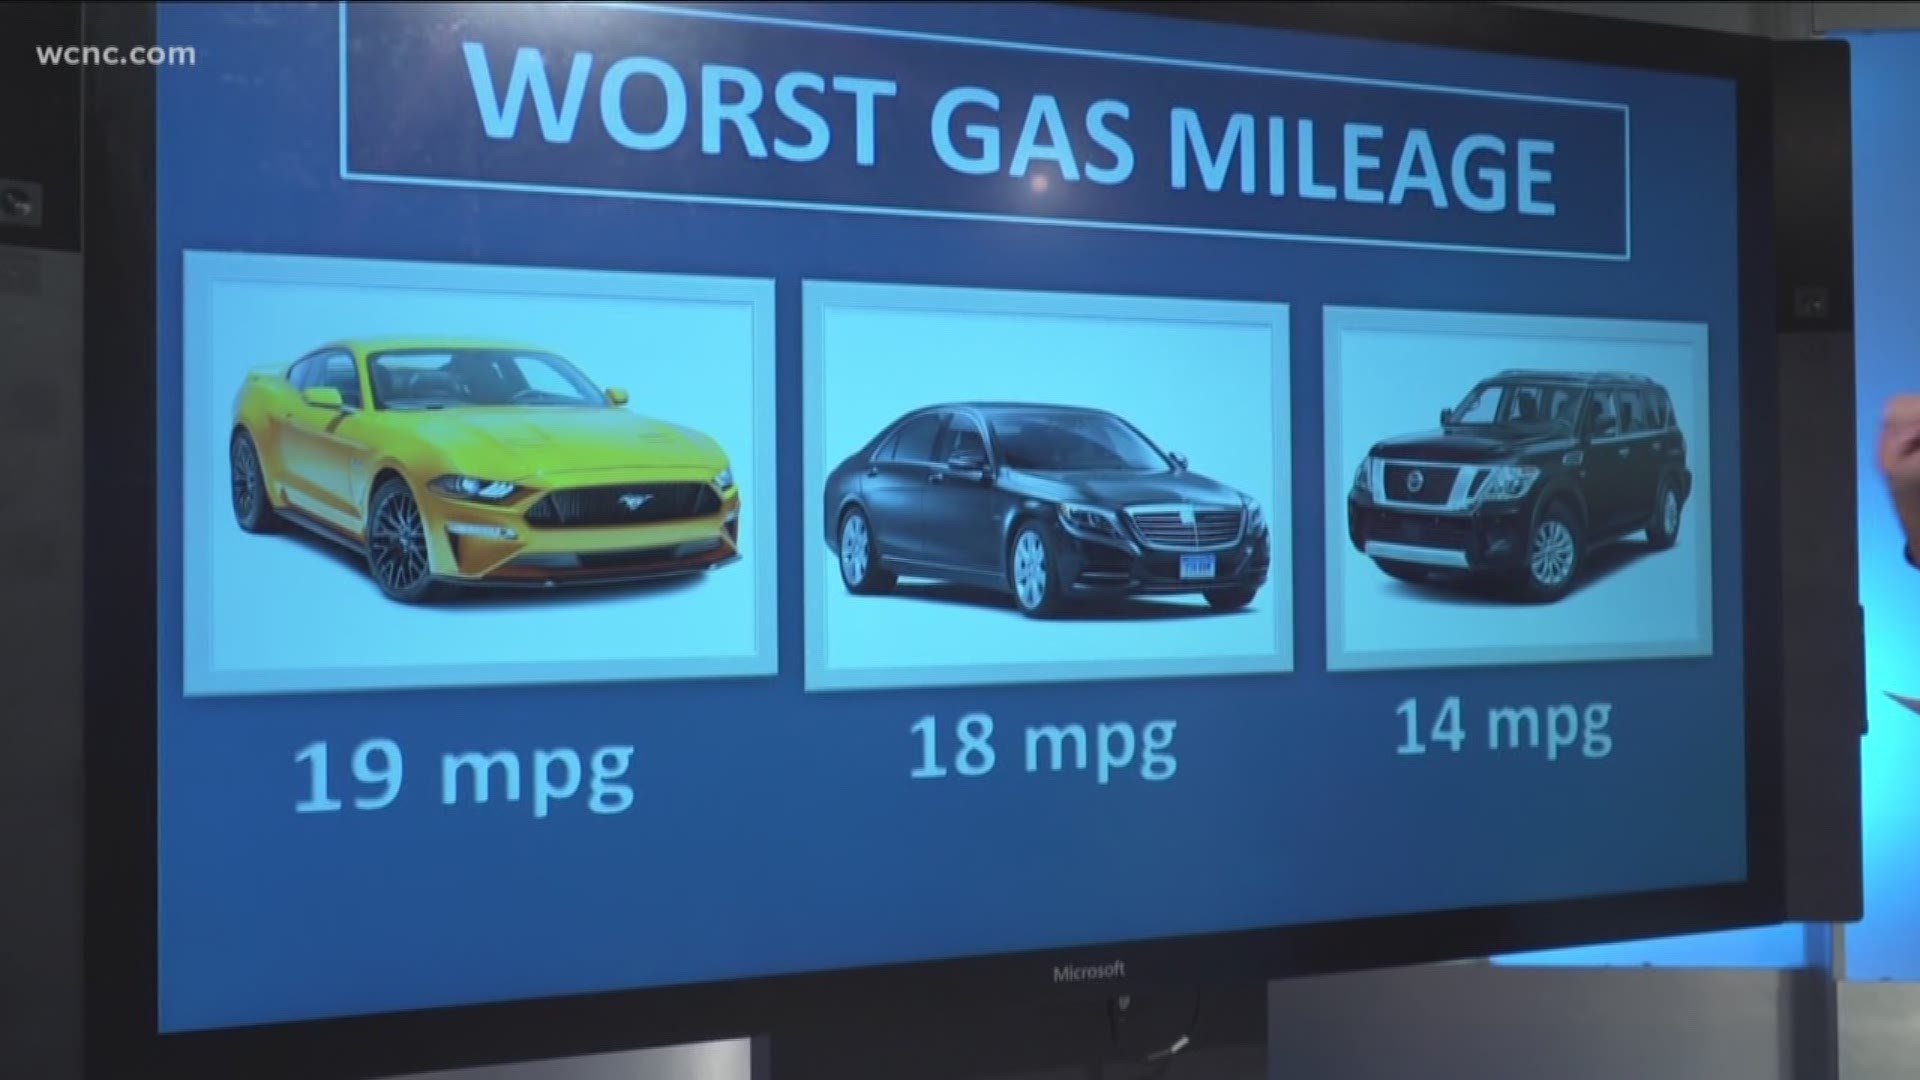 If you're in the market for a new car this summer, you might want to consider fuel economy.